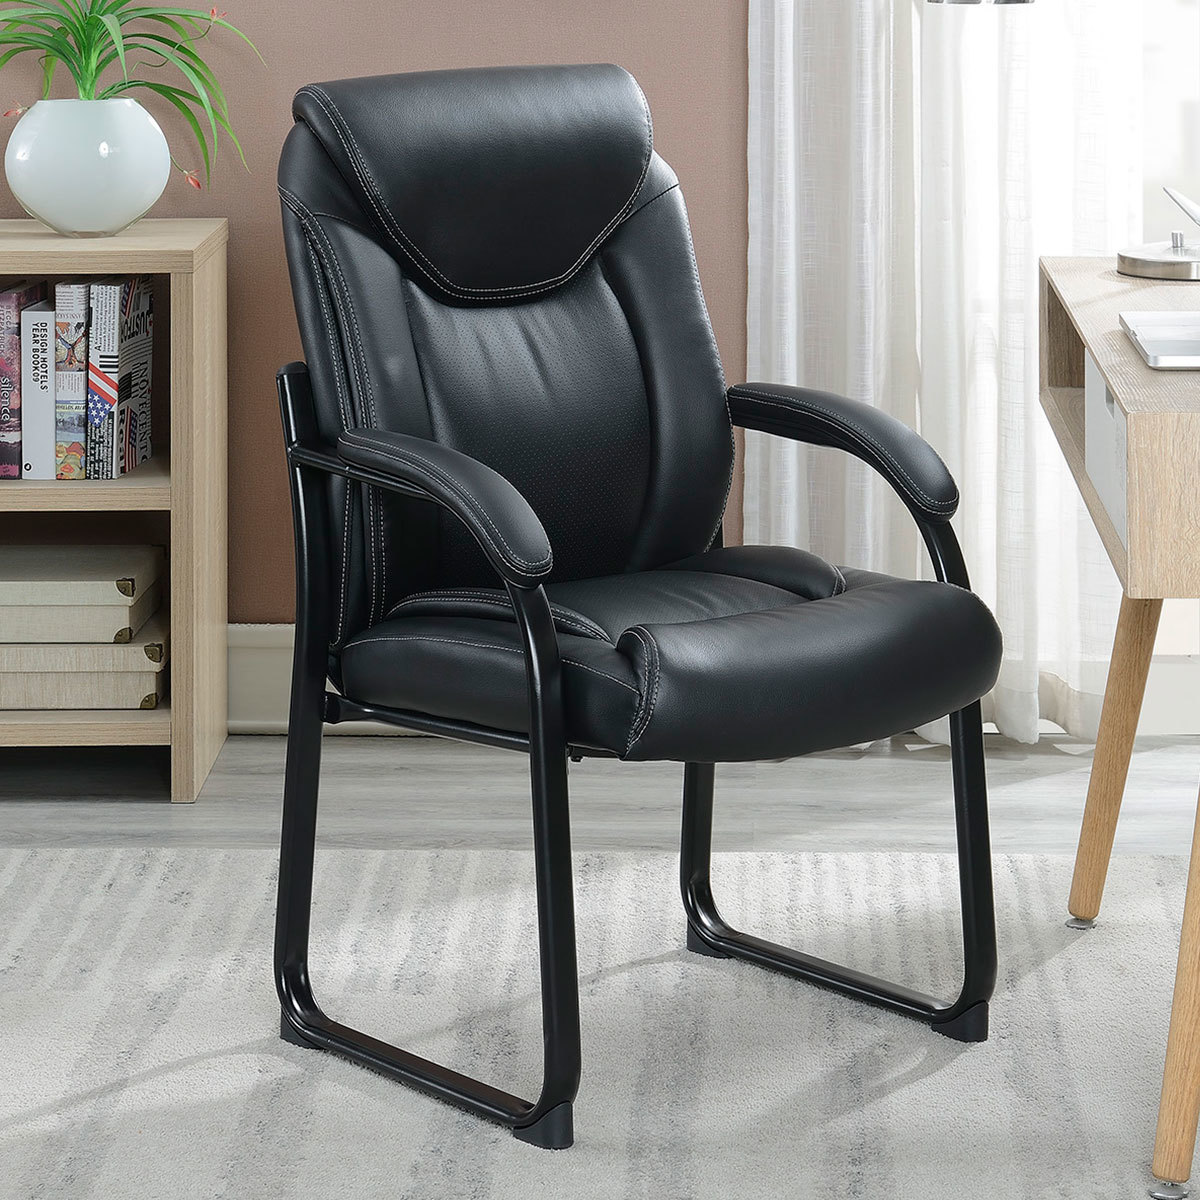 True Innovations Black Bonded Leather Guest Chair Costco Uk